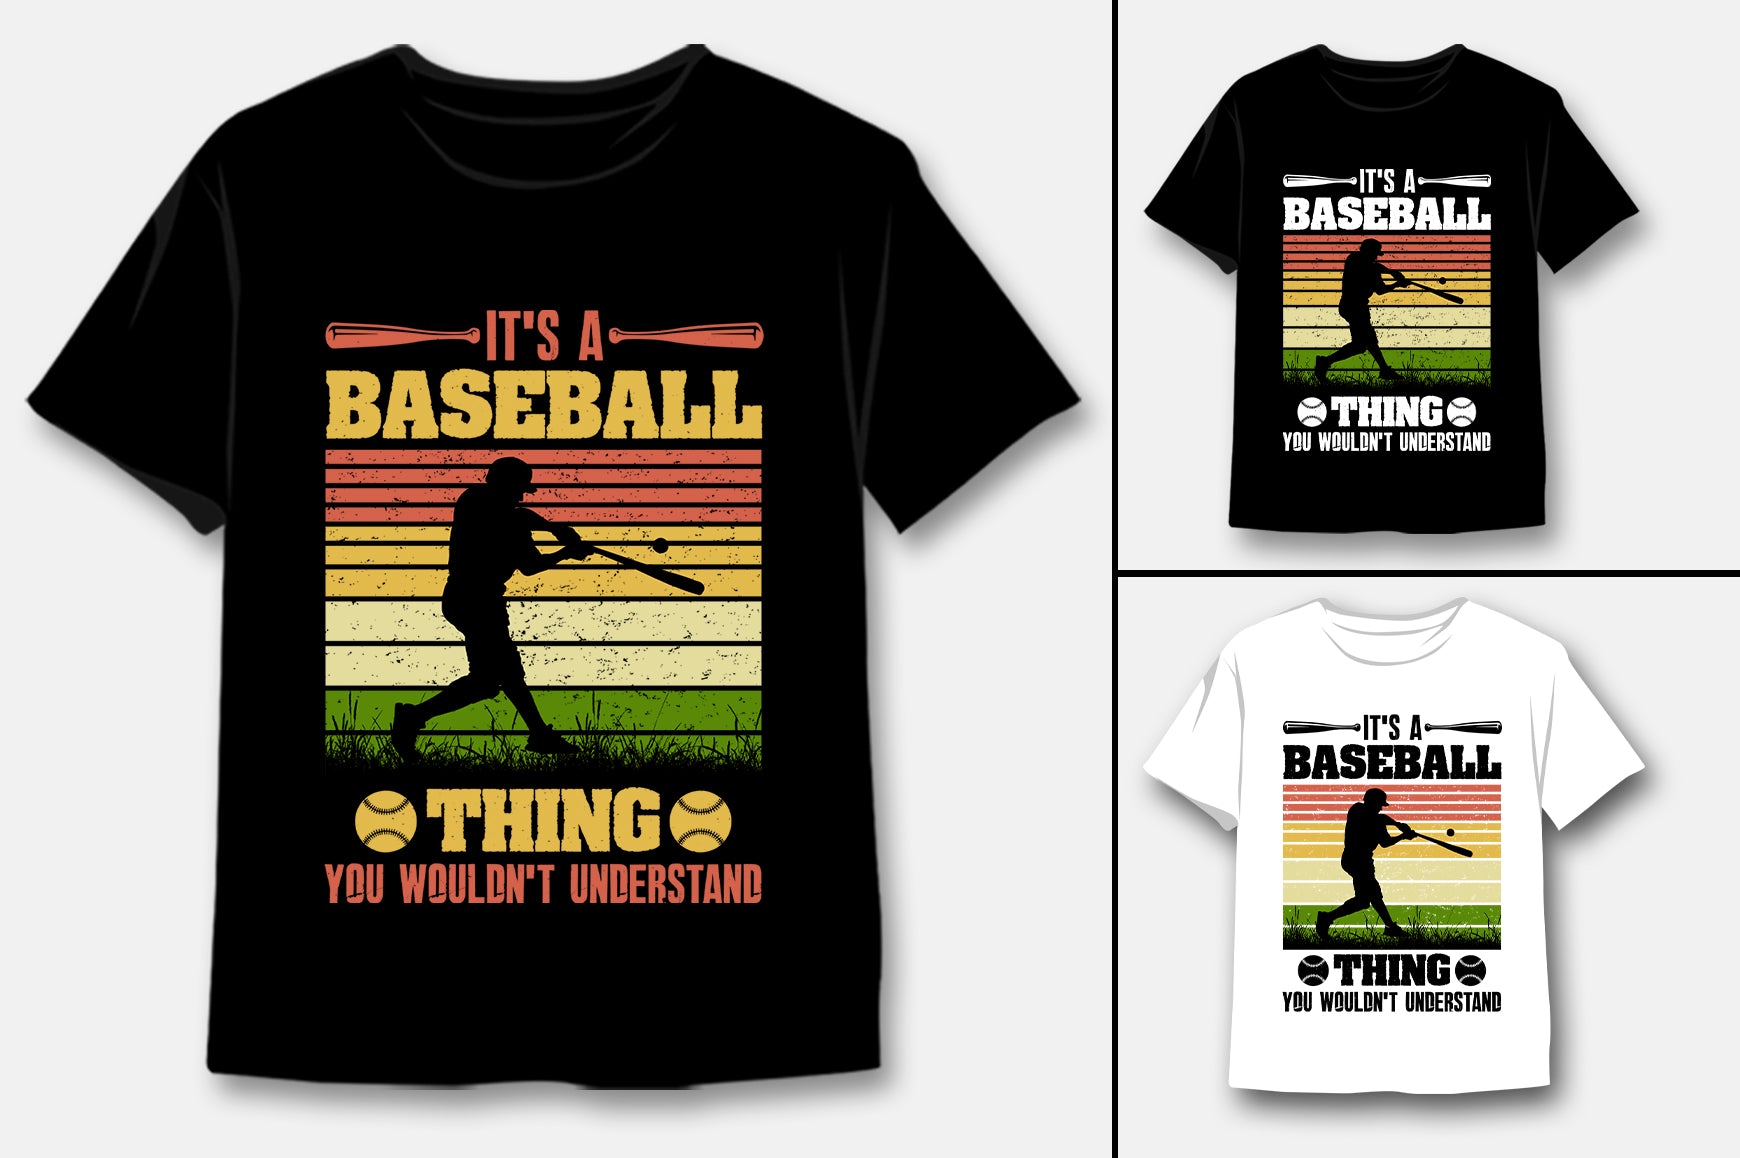 Baseball Apparel and Accessories